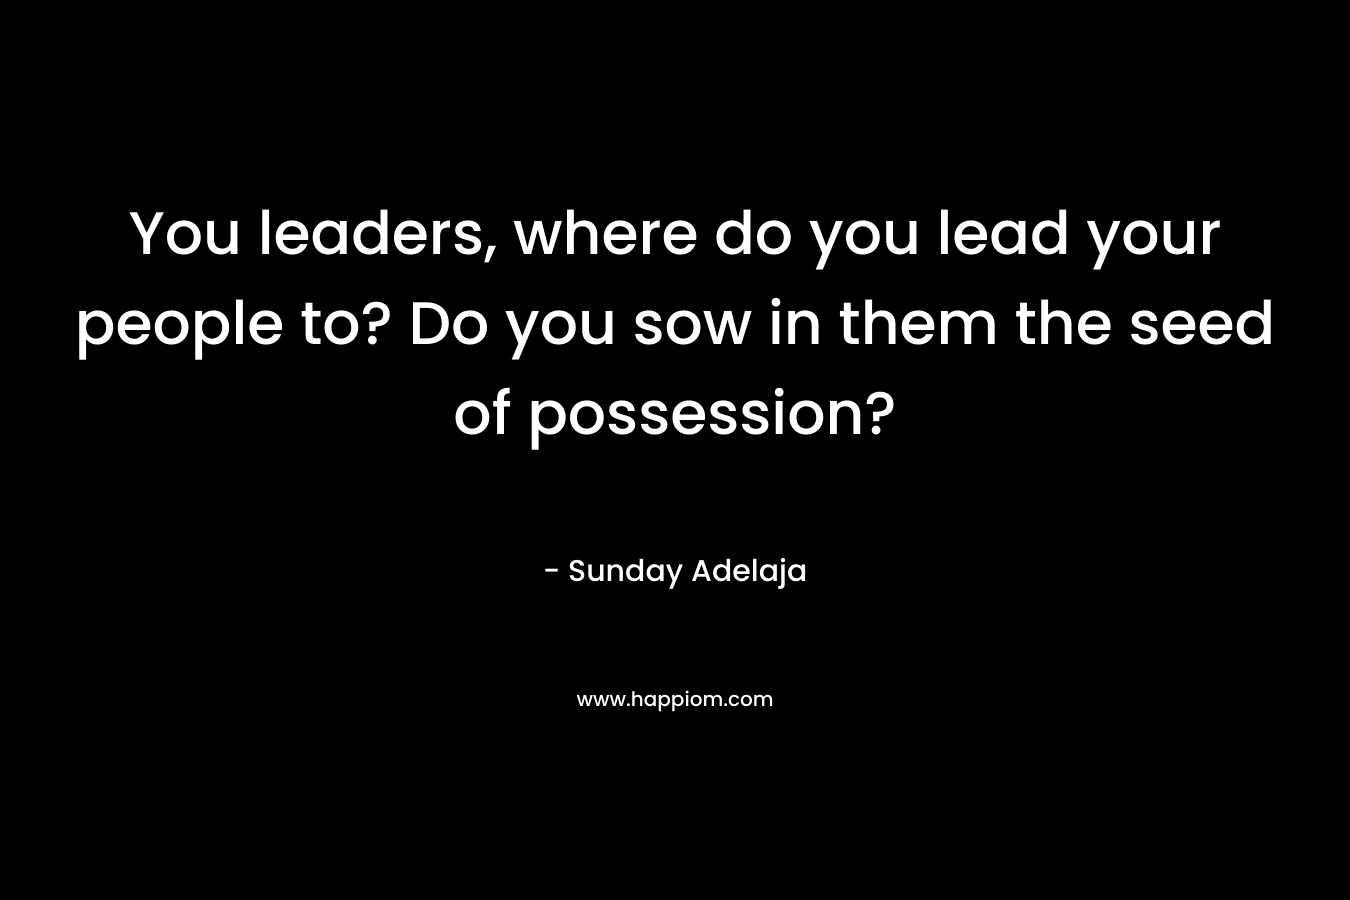 You leaders, where do you lead your people to? Do you sow in them the seed of possession? – Sunday Adelaja